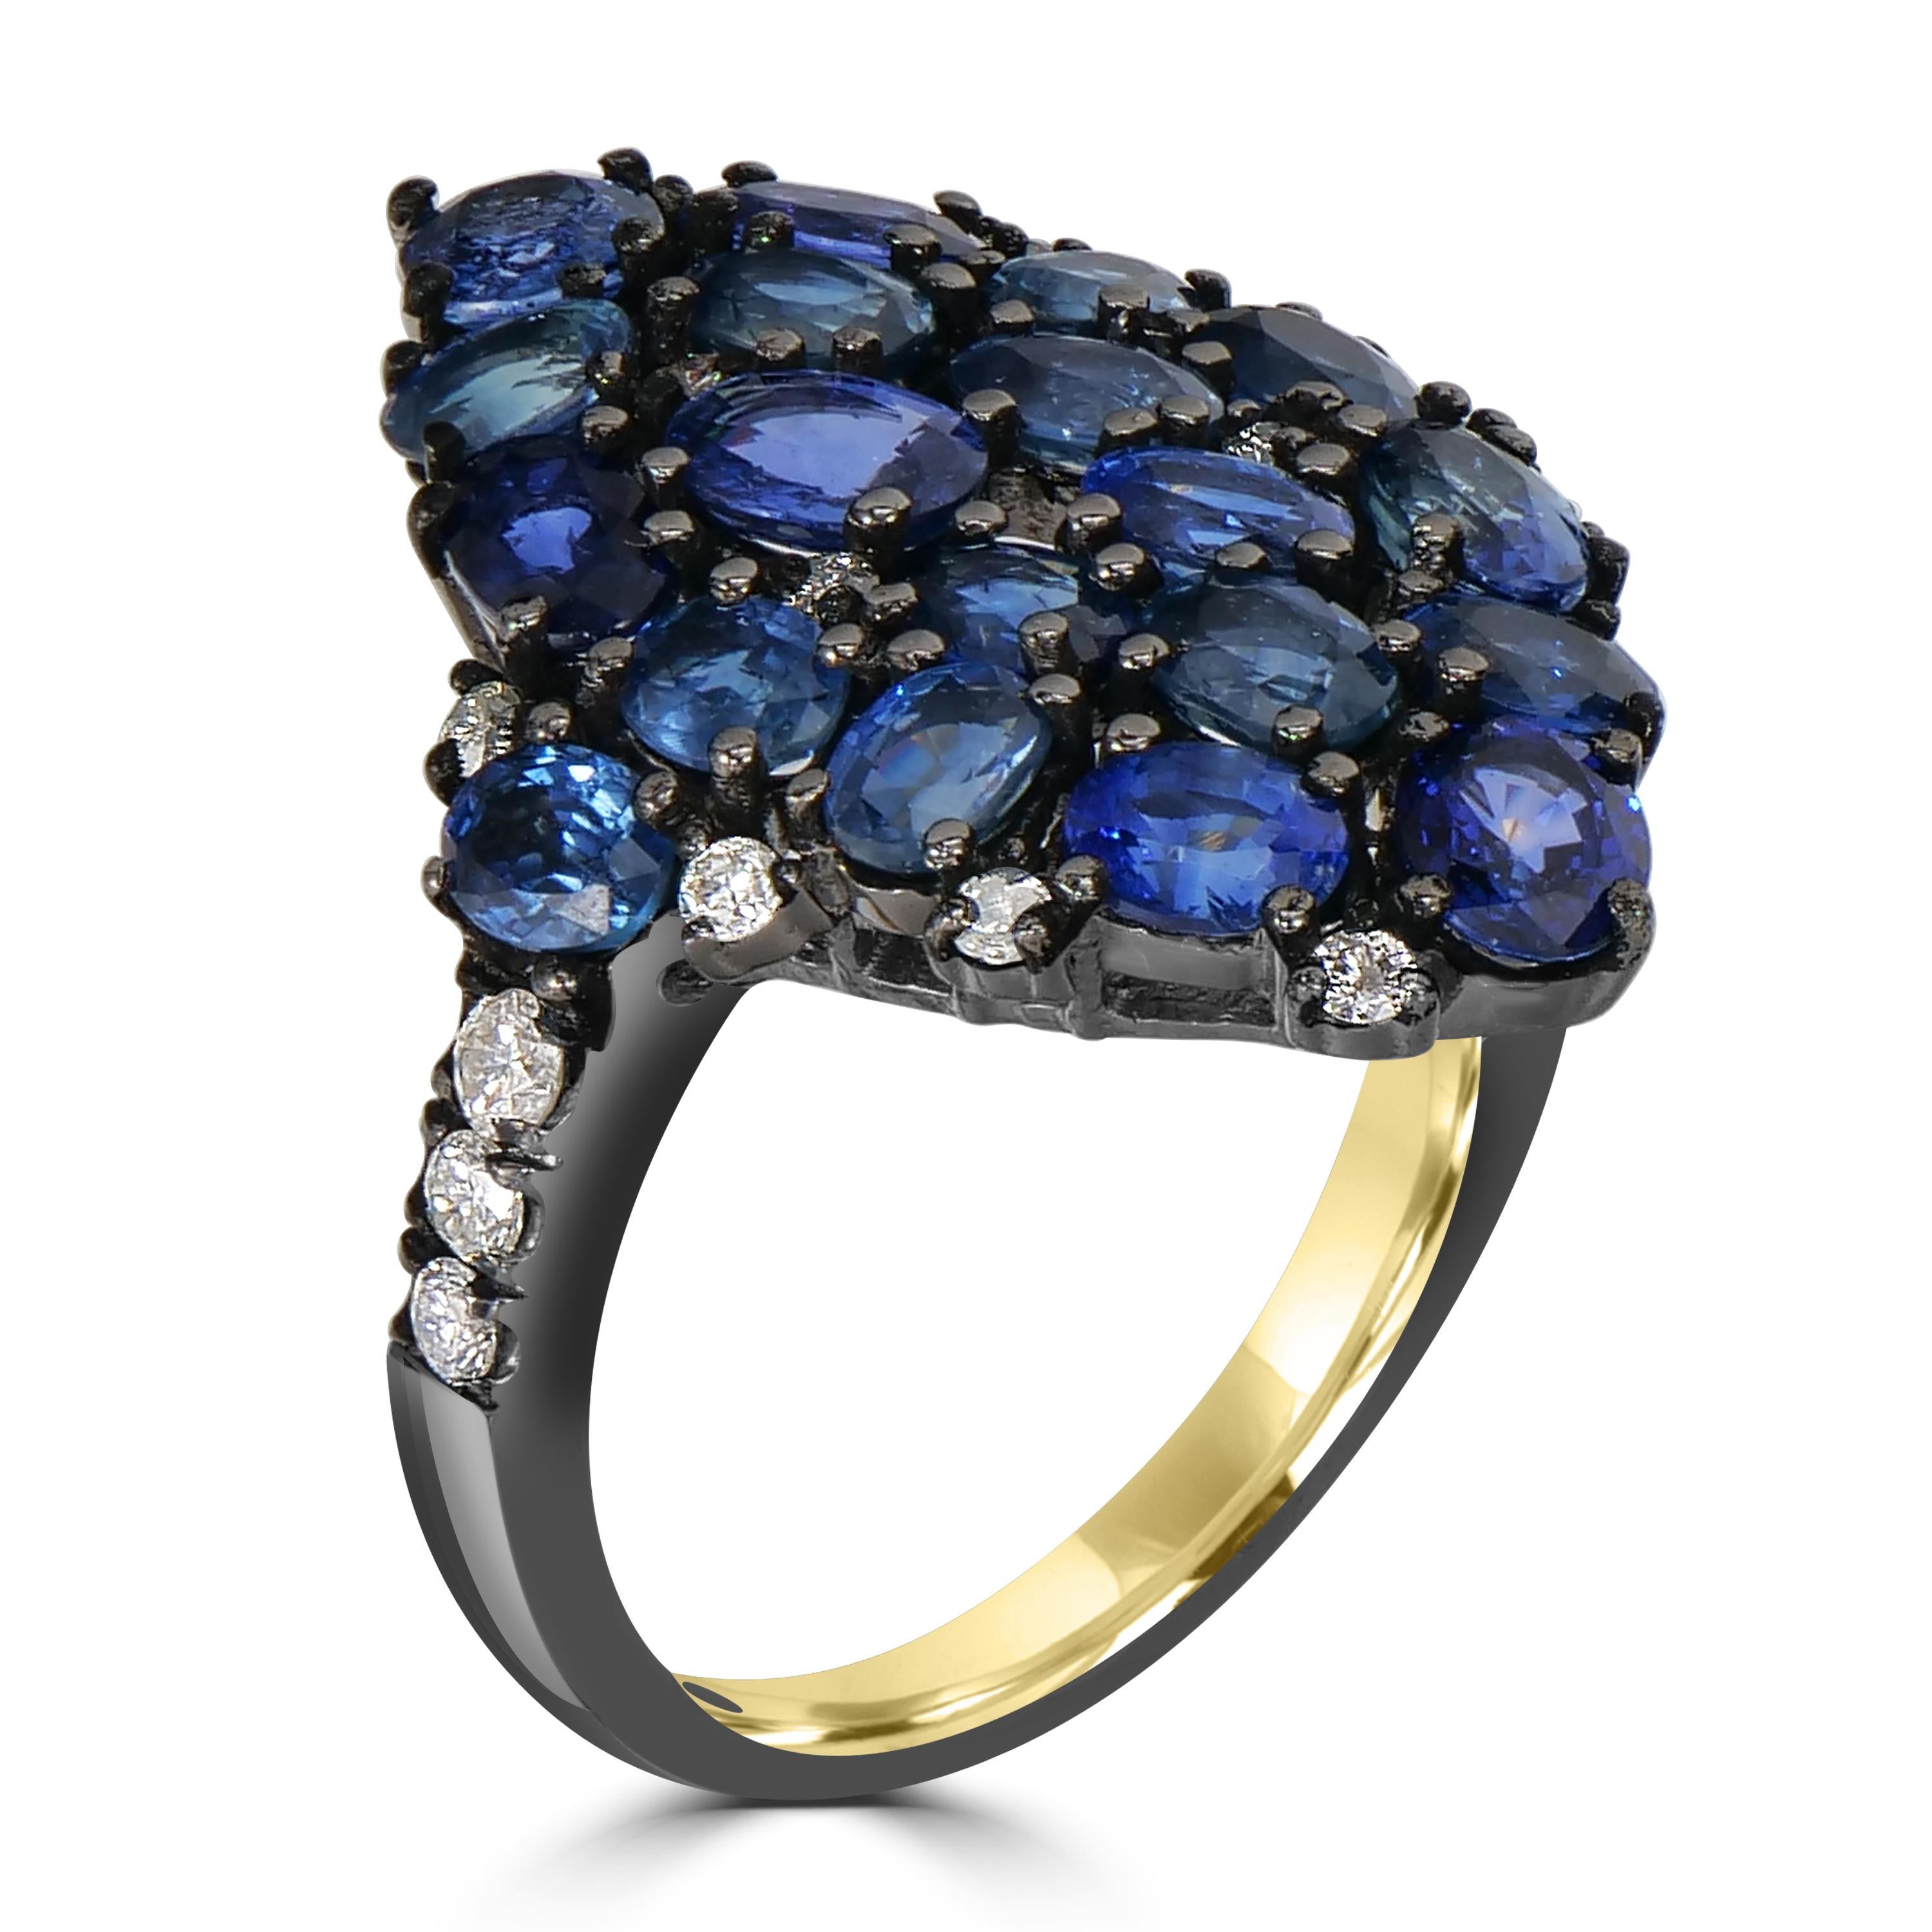 Introducing our captivating Victorian Cluster Ring, a true masterpiece that combines the deep allure of blue sapphires and the unique charm of light brown diamonds. Crafted in a luxurious 18K/925 gold setting with black prongs and shank, this ring